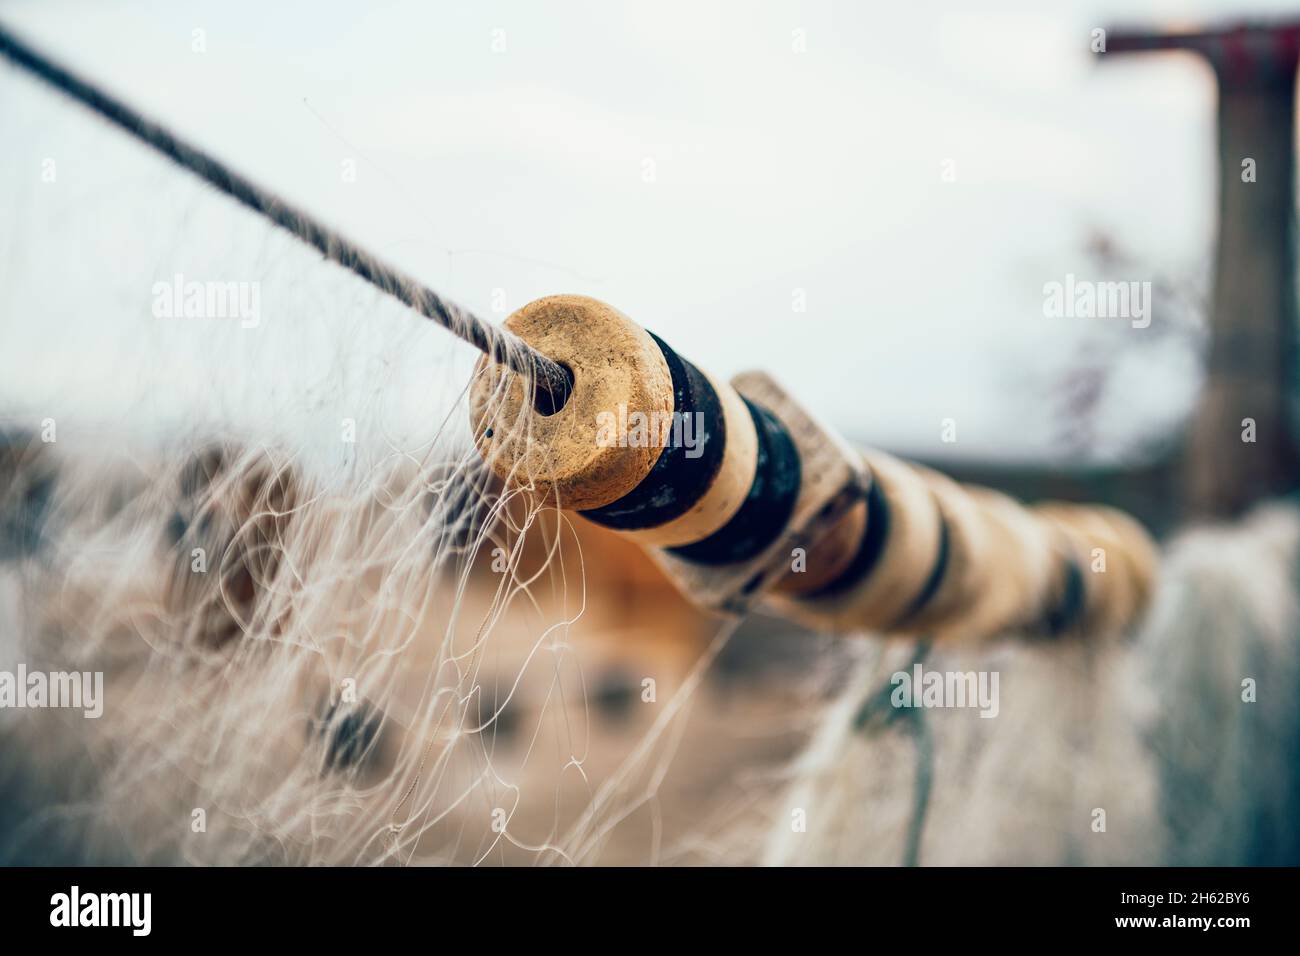 detail of a fishing net while drying on the beach Stock Photo